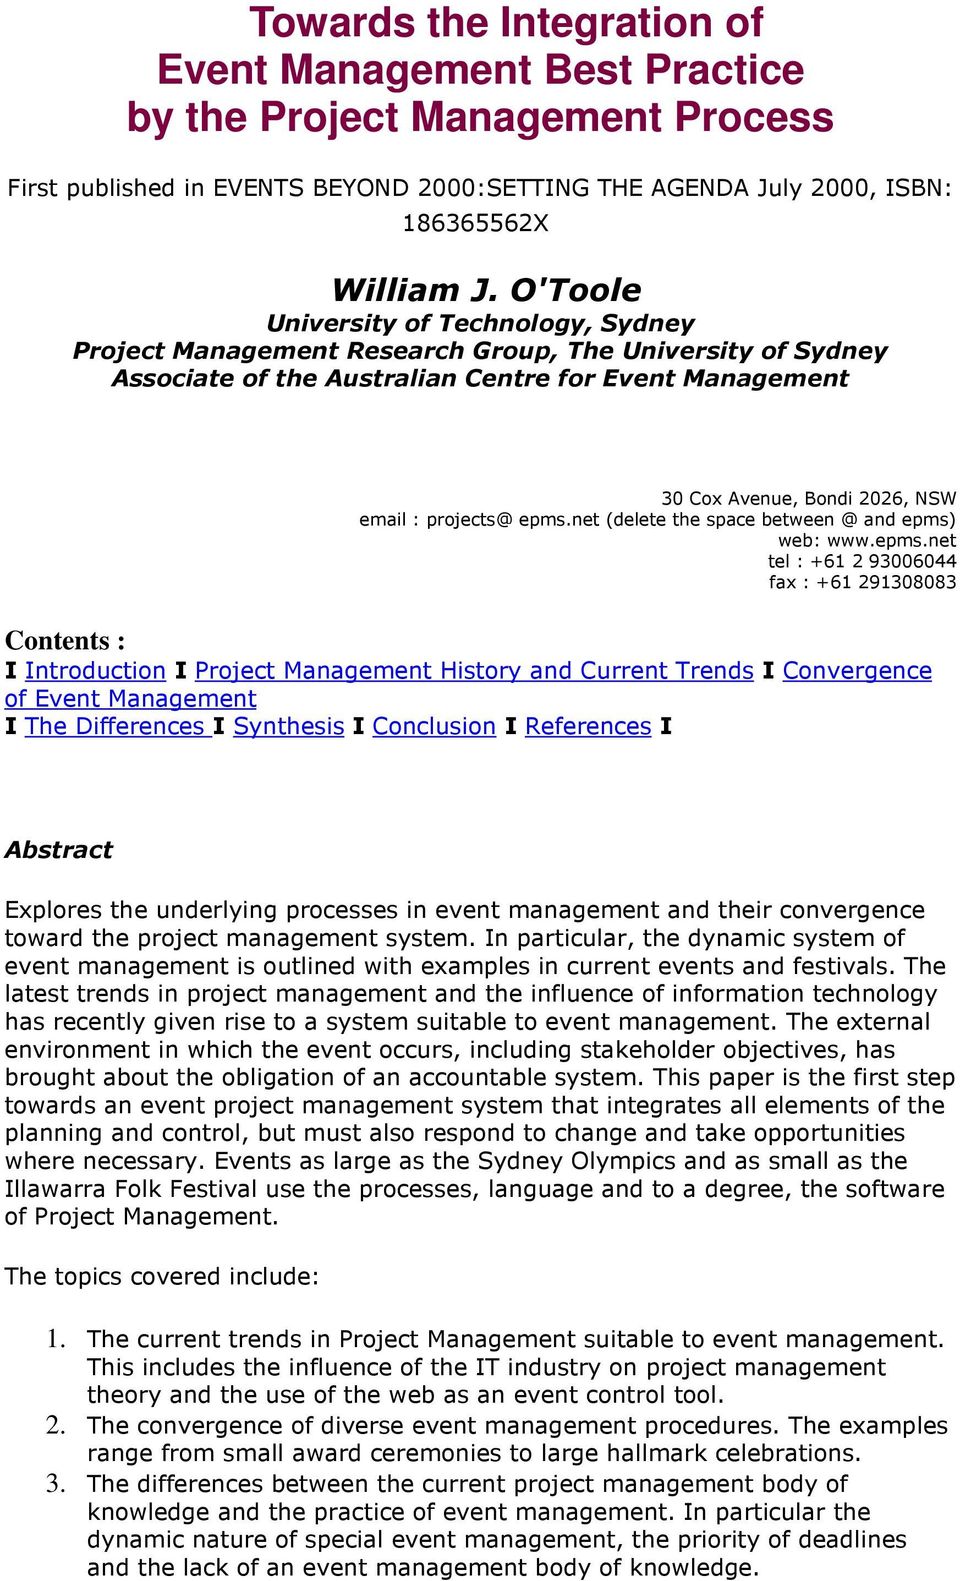 research project on event management